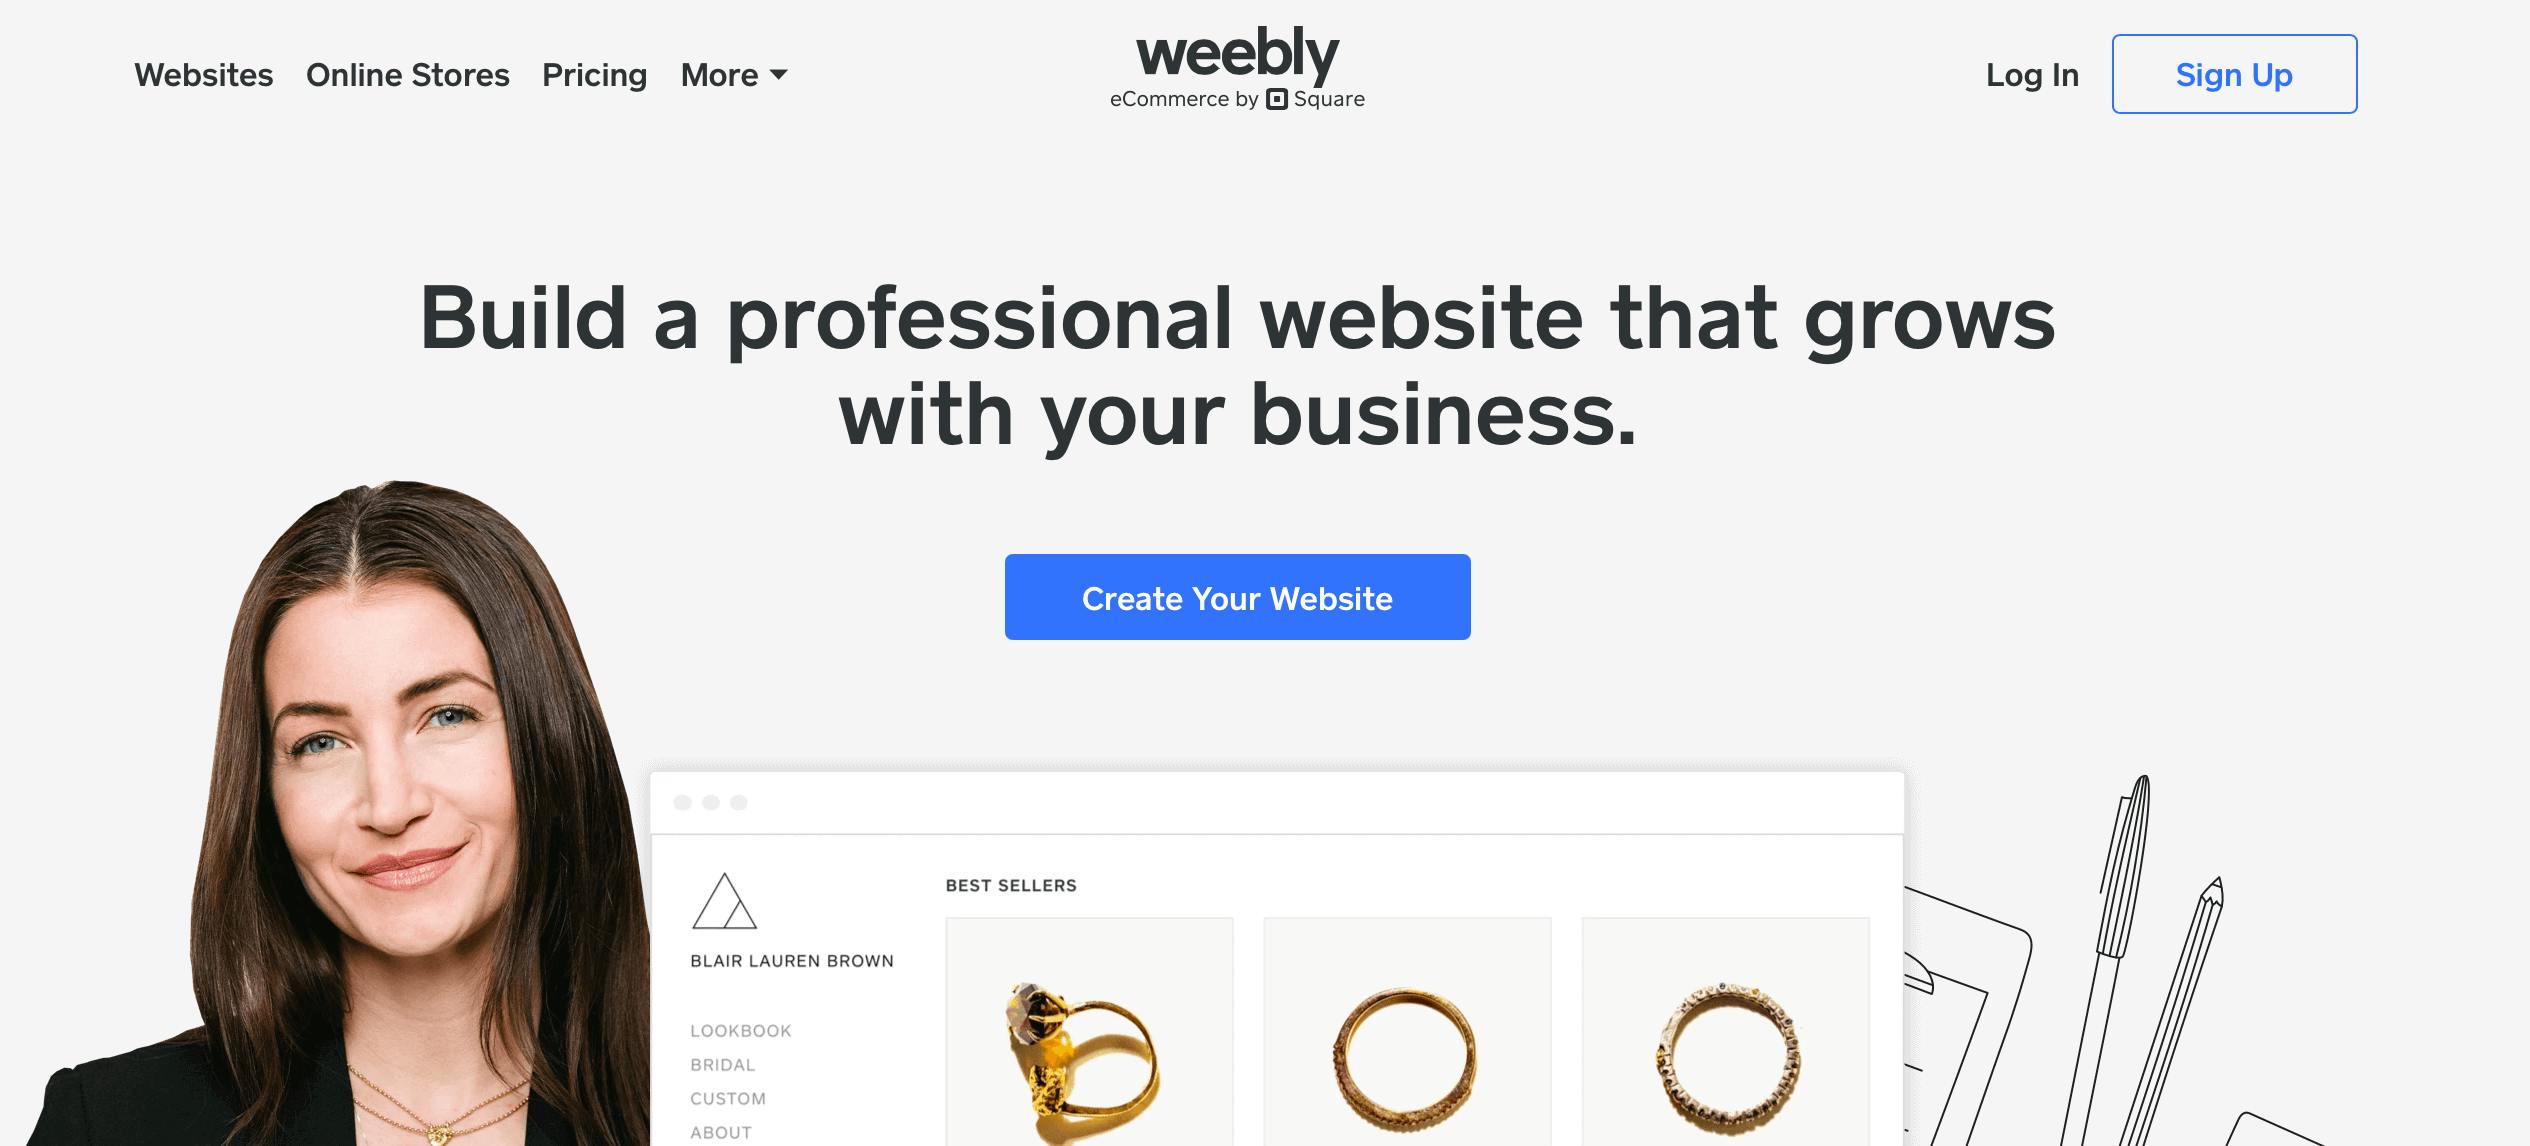 weebly homepage